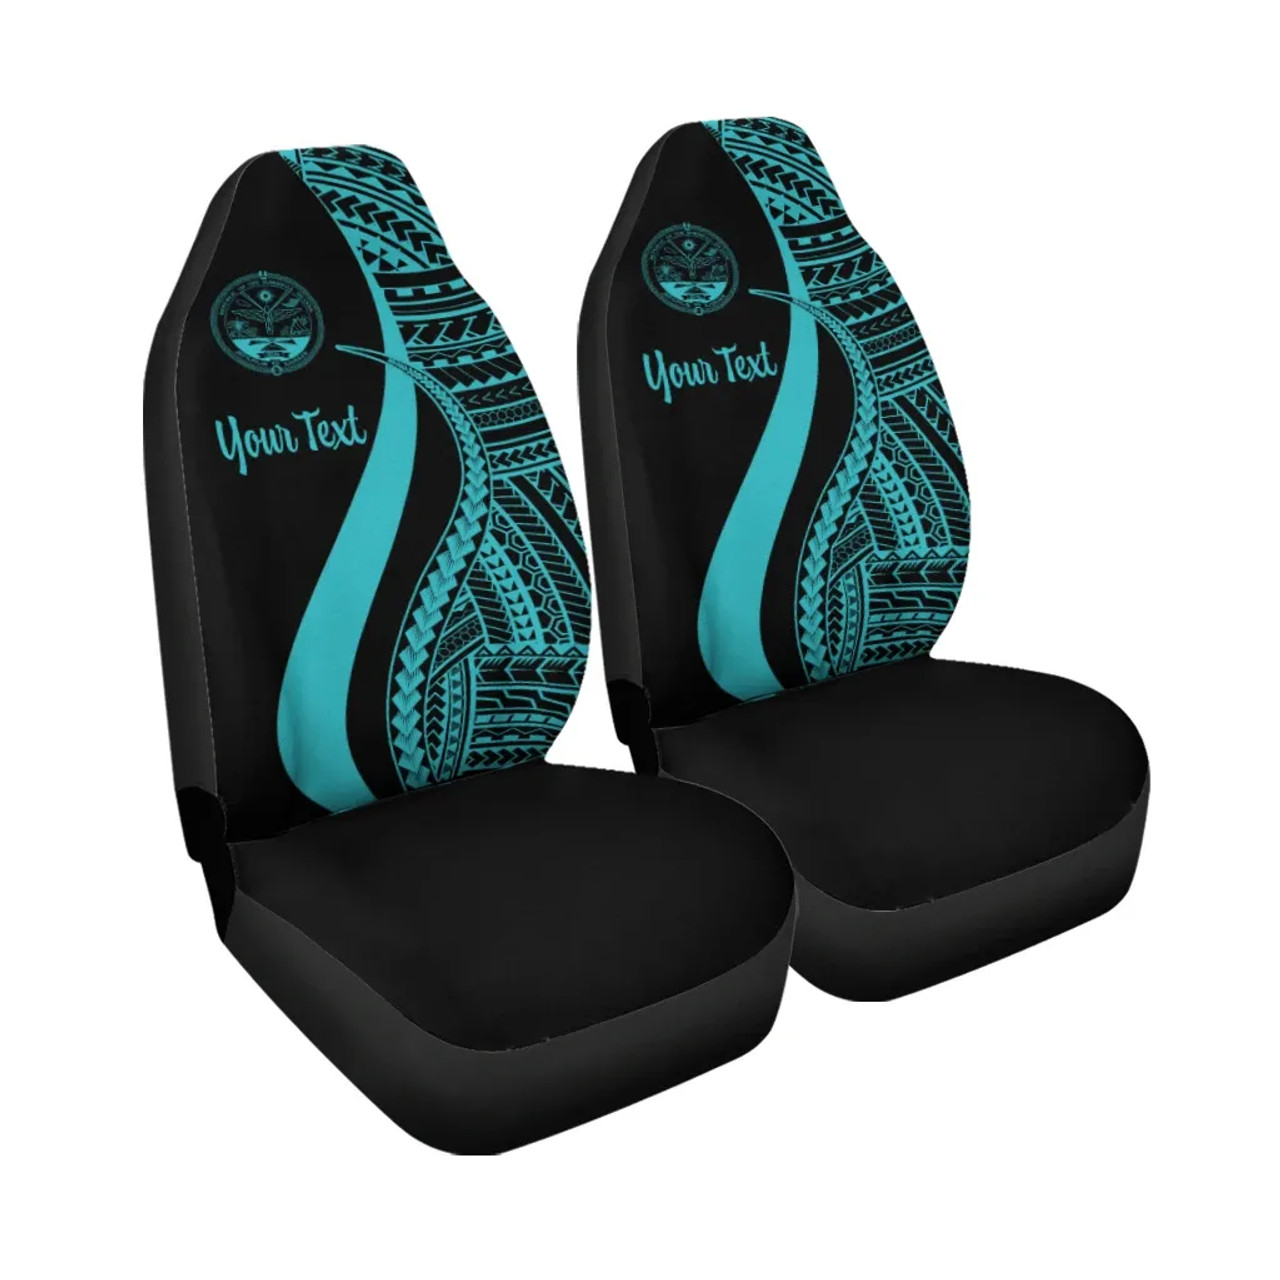 Marshall Islands Custom Personalised Car Seat Covers - Turquoise Polynesian Tentacle Tribal Pattern Crest